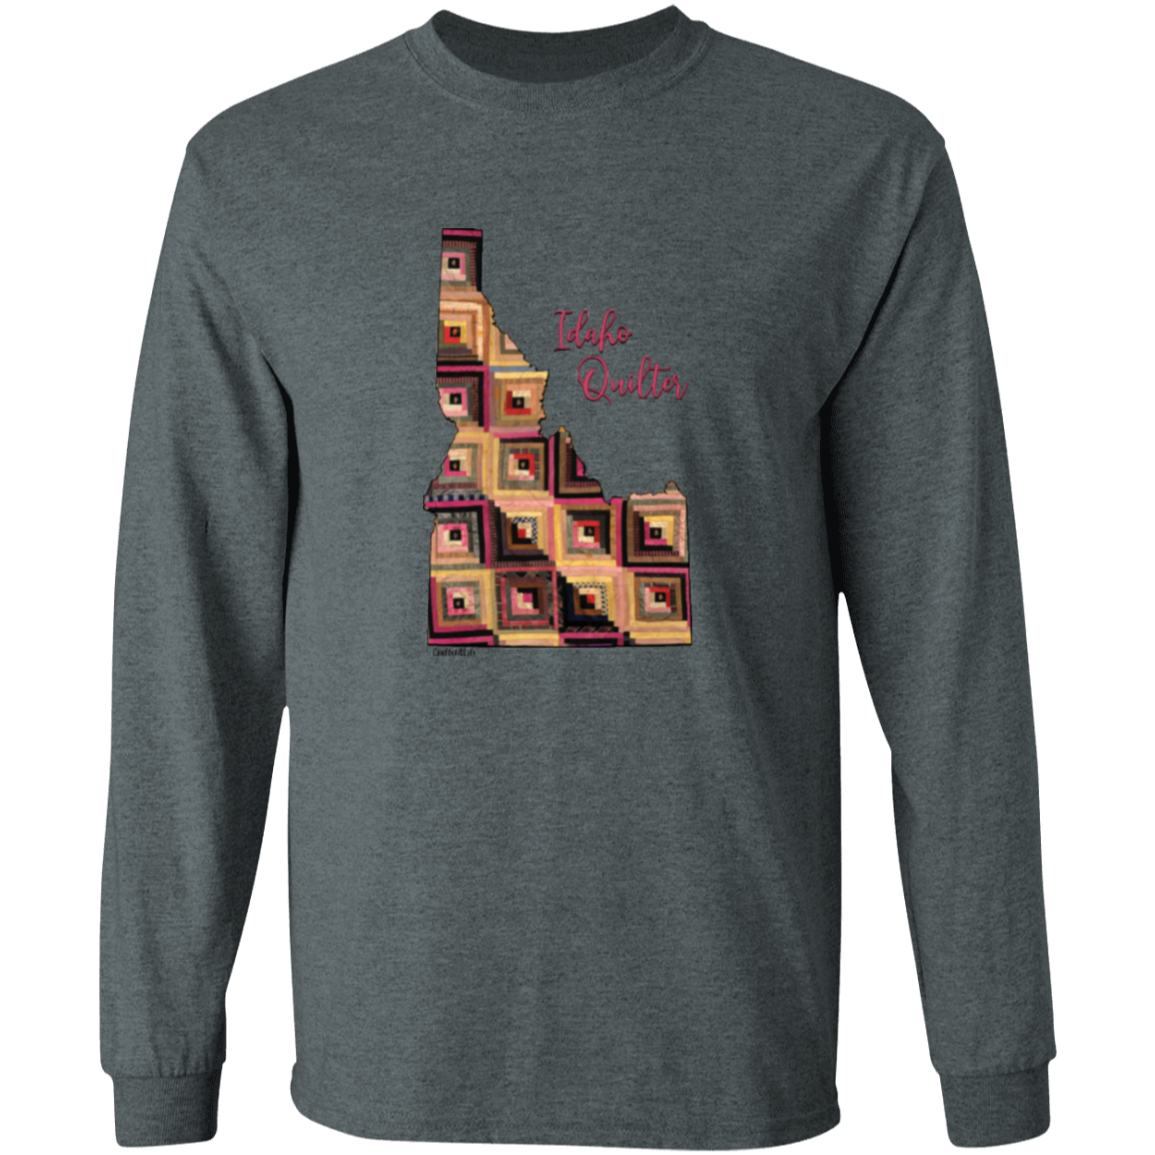 Idaho Quilter Long Sleeve T-Shirt, Gift for Quilting Friends and Family